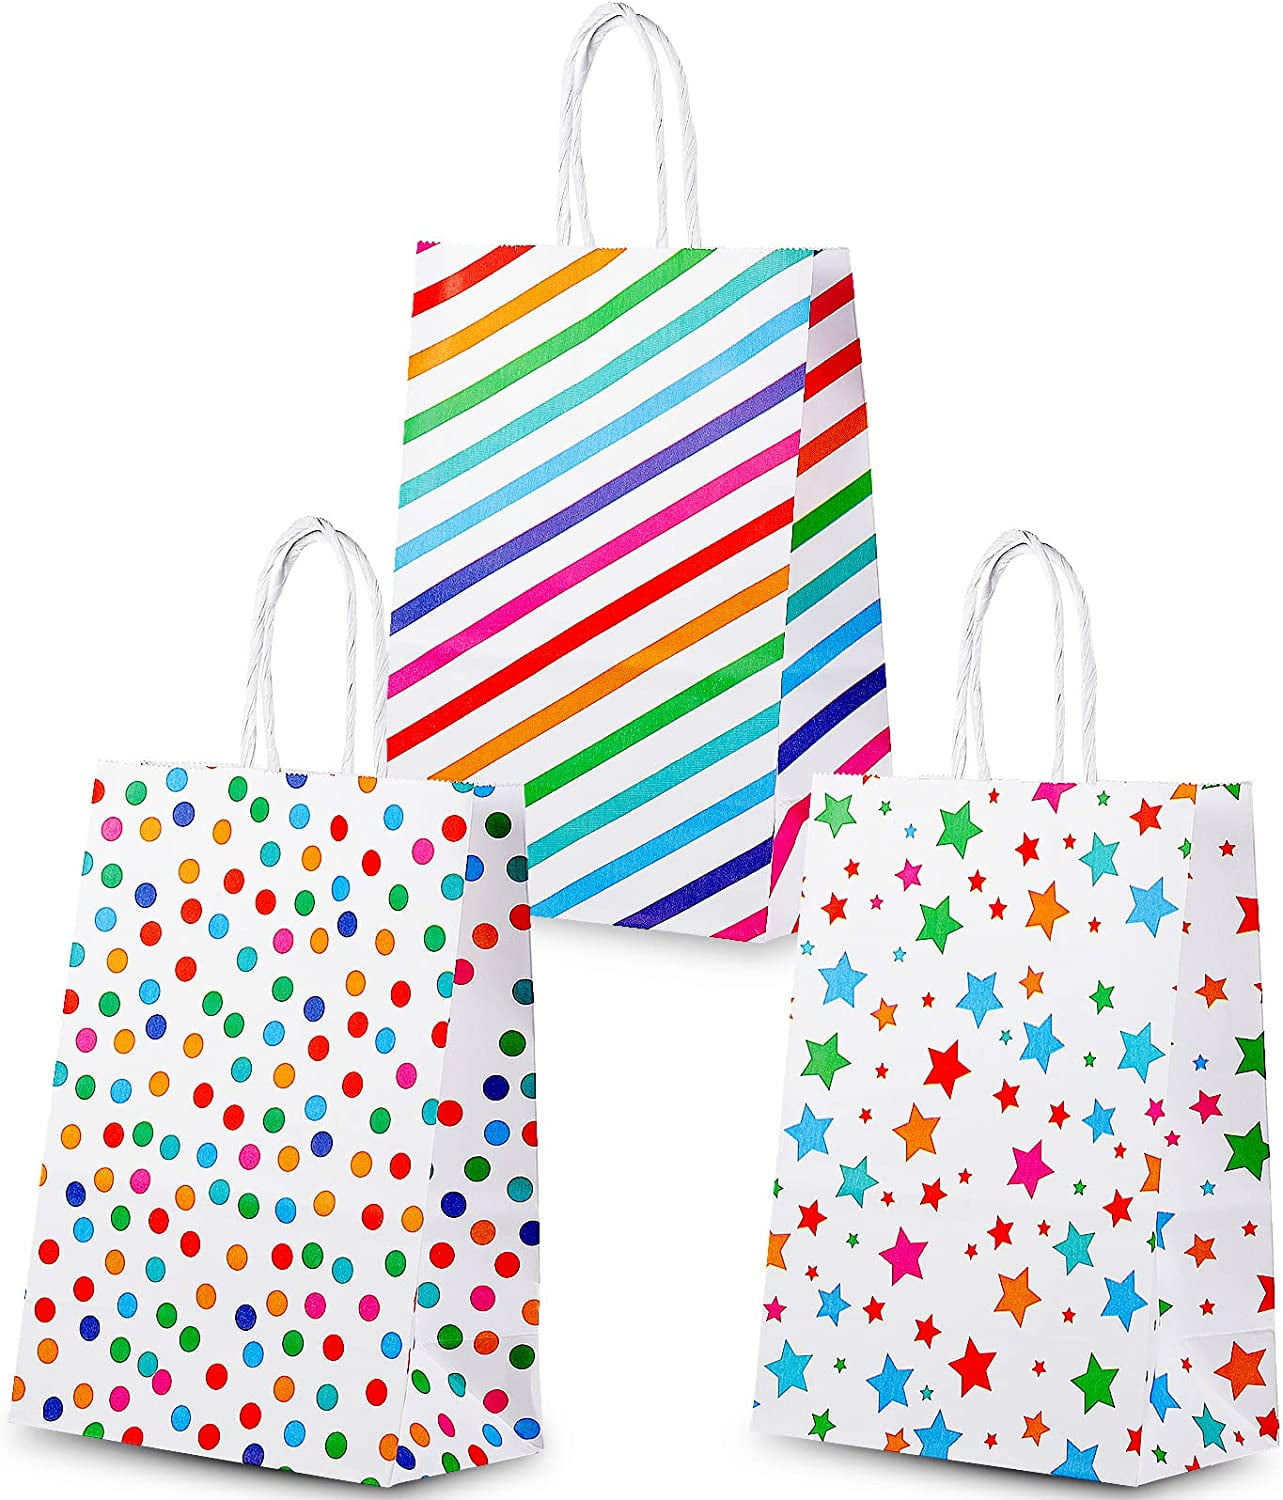 24 Pcs Kraft Paper Rainbow Party Favor Bags with Handle, Stickers Assorted  Colors Cute Dots Stars, Small Gift Bags Bulk, Goodie Bags for Kids  Birthday, Wedding, Baby Shower, Crafts and Party Supplies -